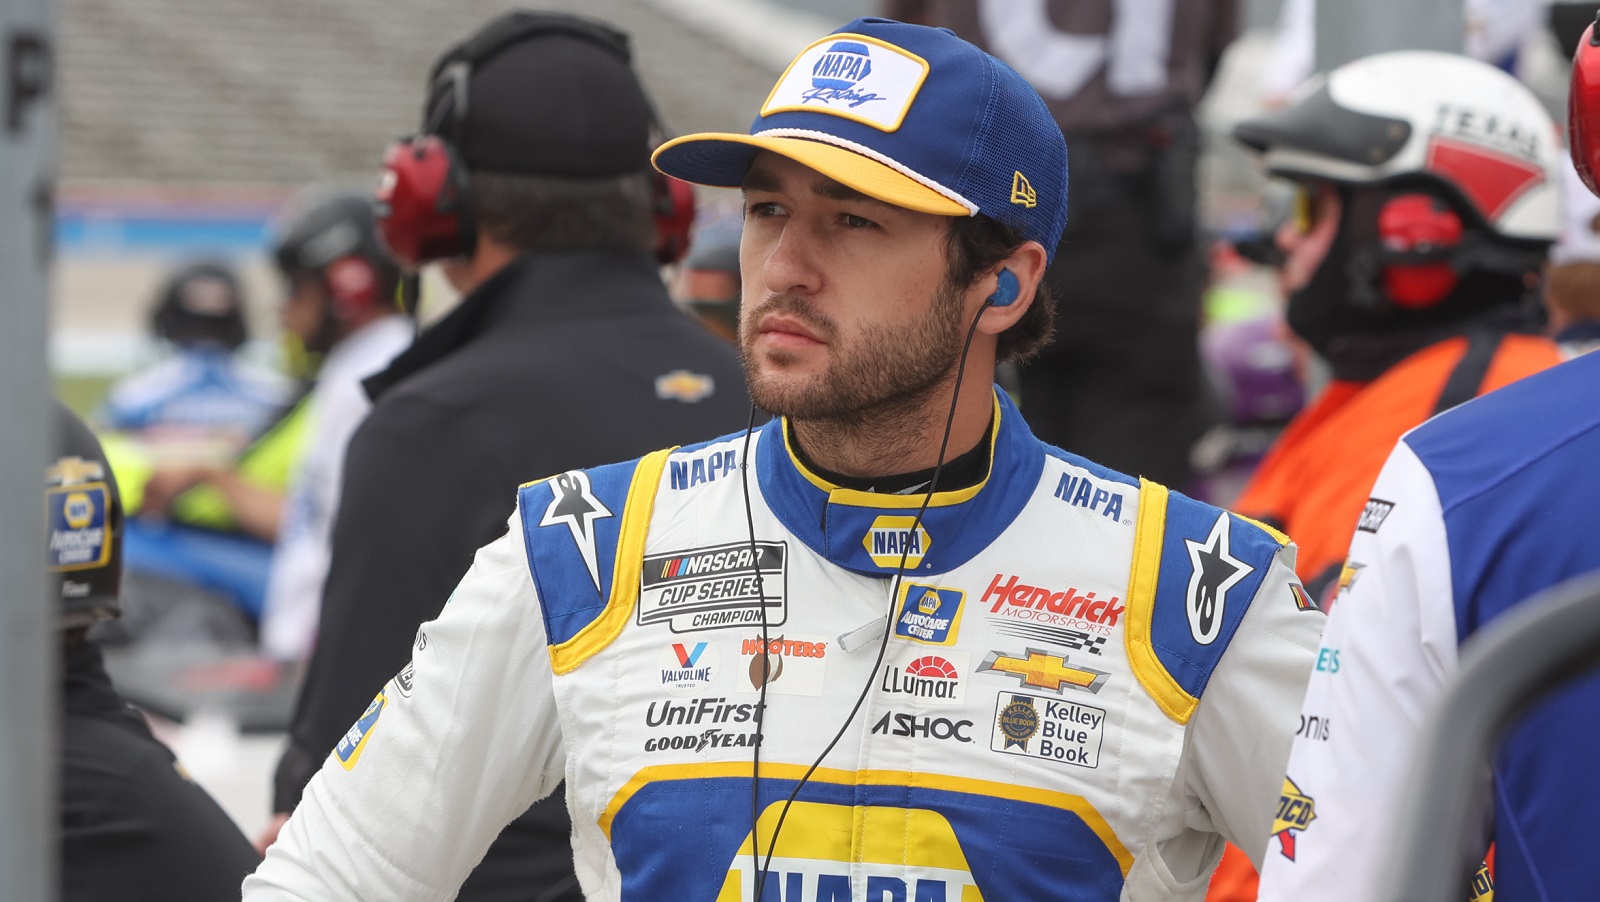 Chase Elliott watches the action during practice for the NASCAR Cup Series All-Star Race on May 21, 2022, at Texas Motor Speedway. | George Walker/Icon Sportswire via Getty Images